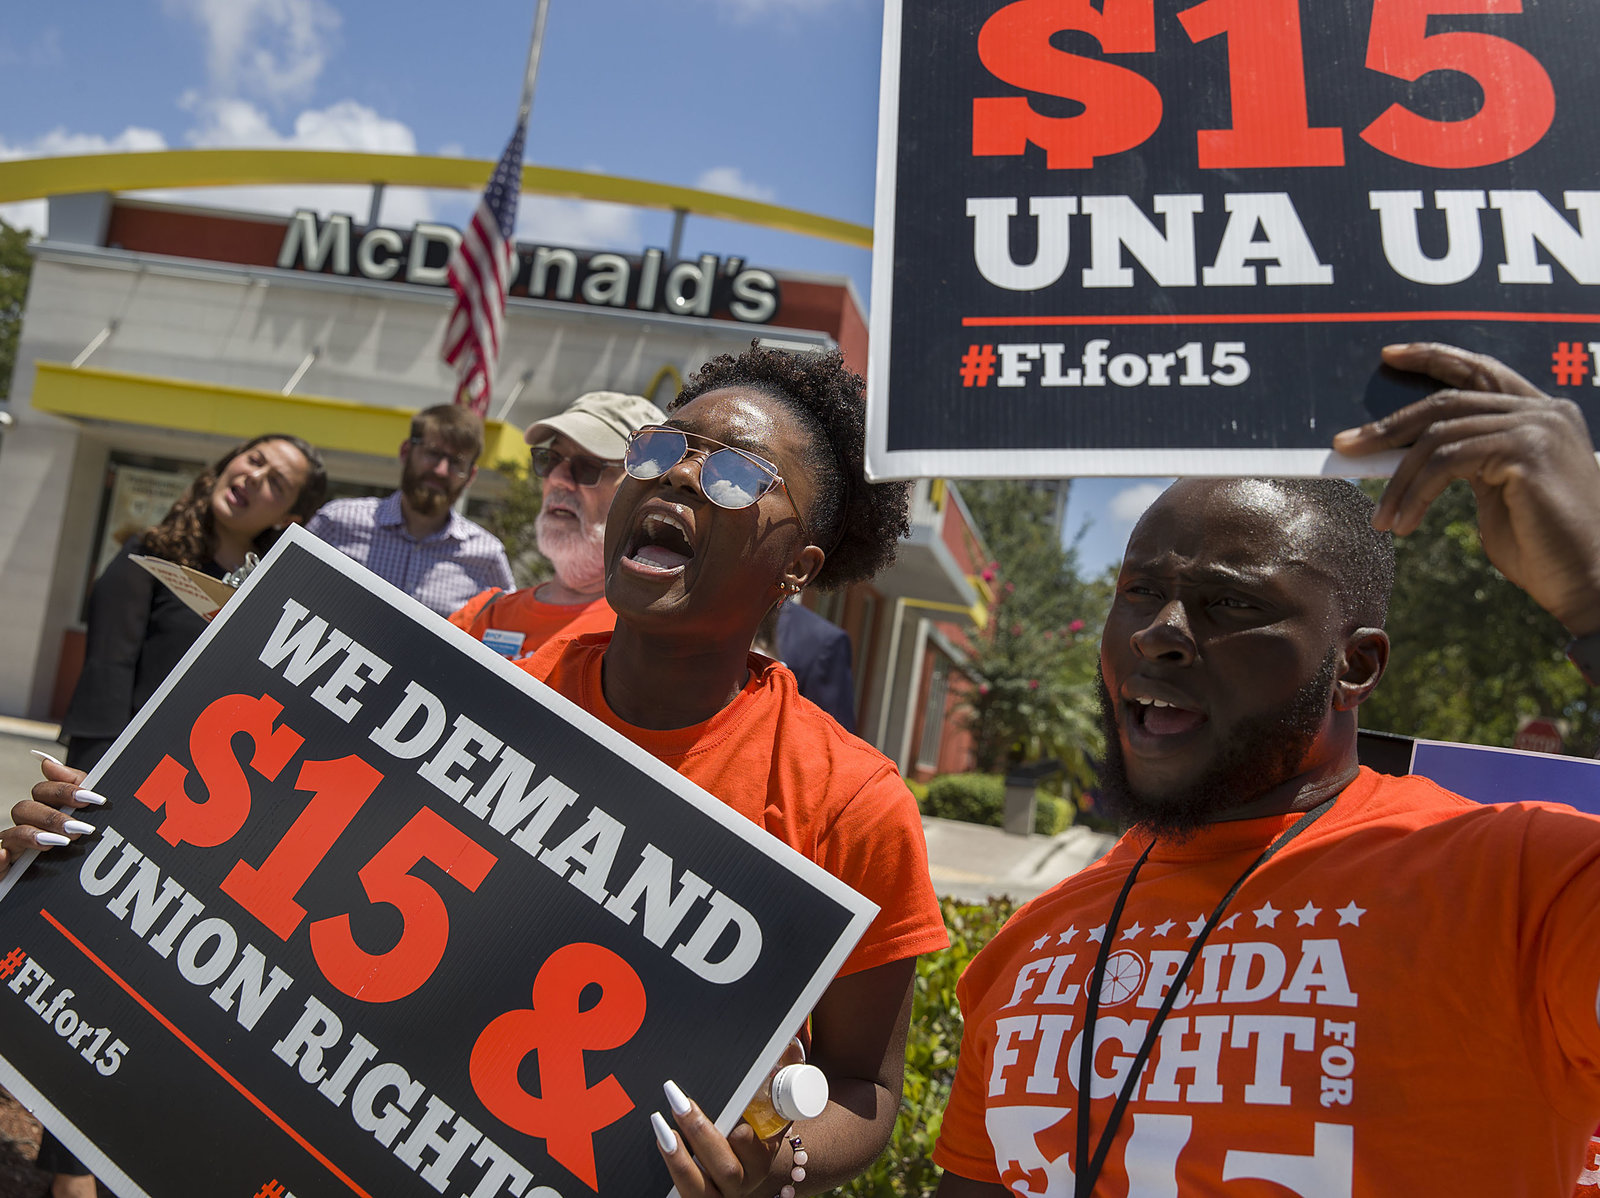 Florida Just Passed A $15 Minimum Wage. Is The Time Right For A Big Nationwide Hike?